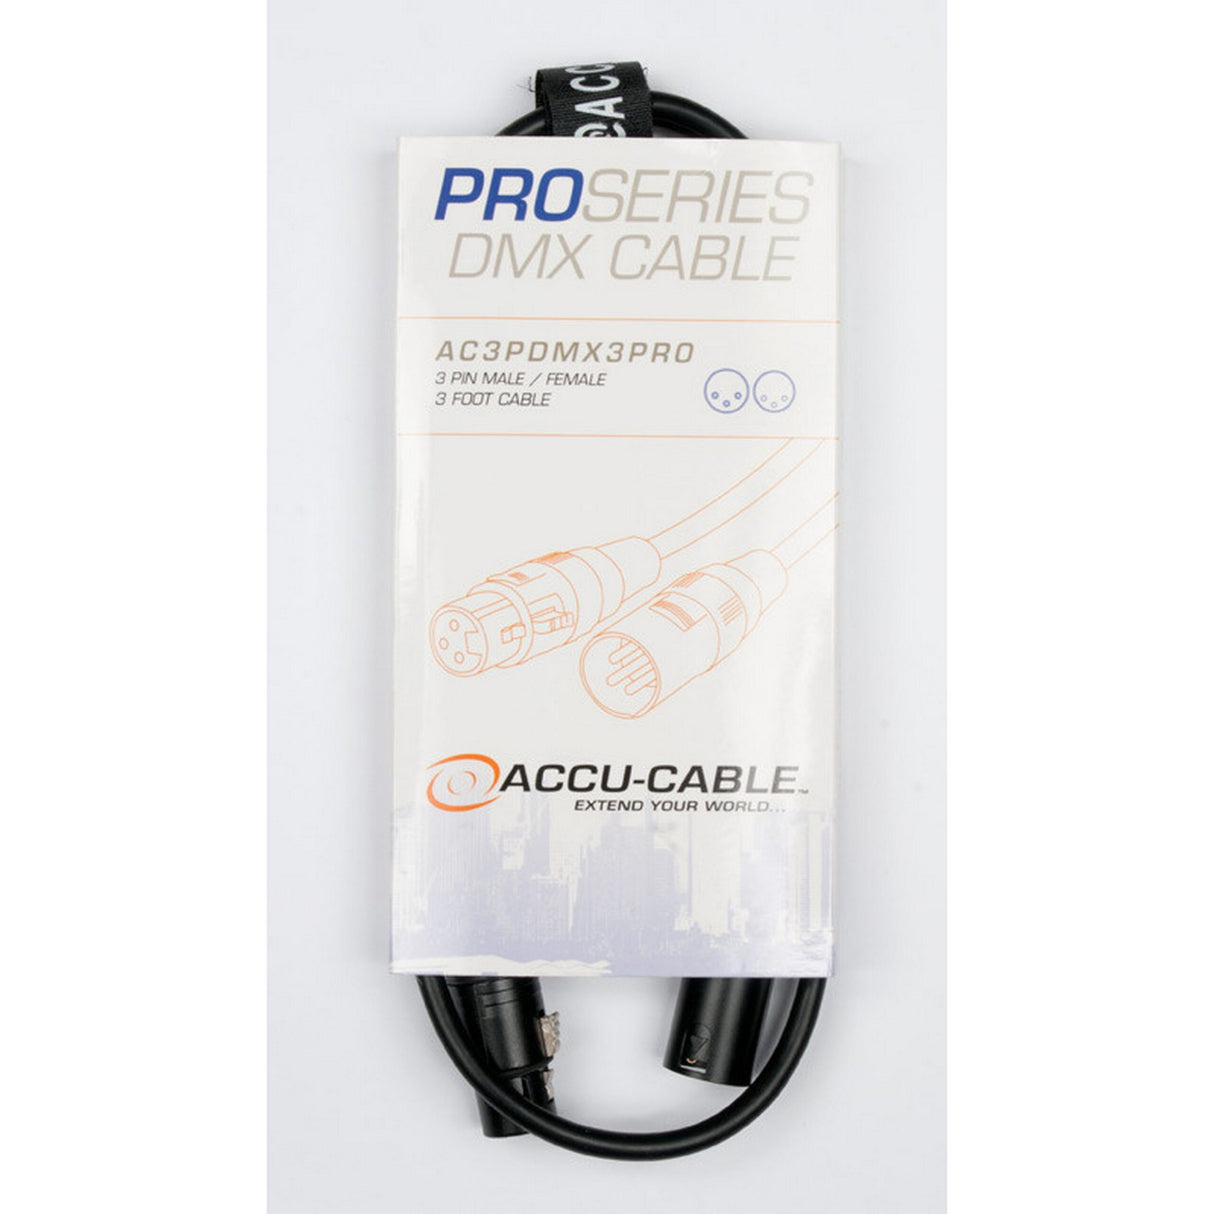 Accu Cable AC3PDMX3PRO Pro Series 3-Foot 3-Pin Male to 3-Pin Female DMX Cable